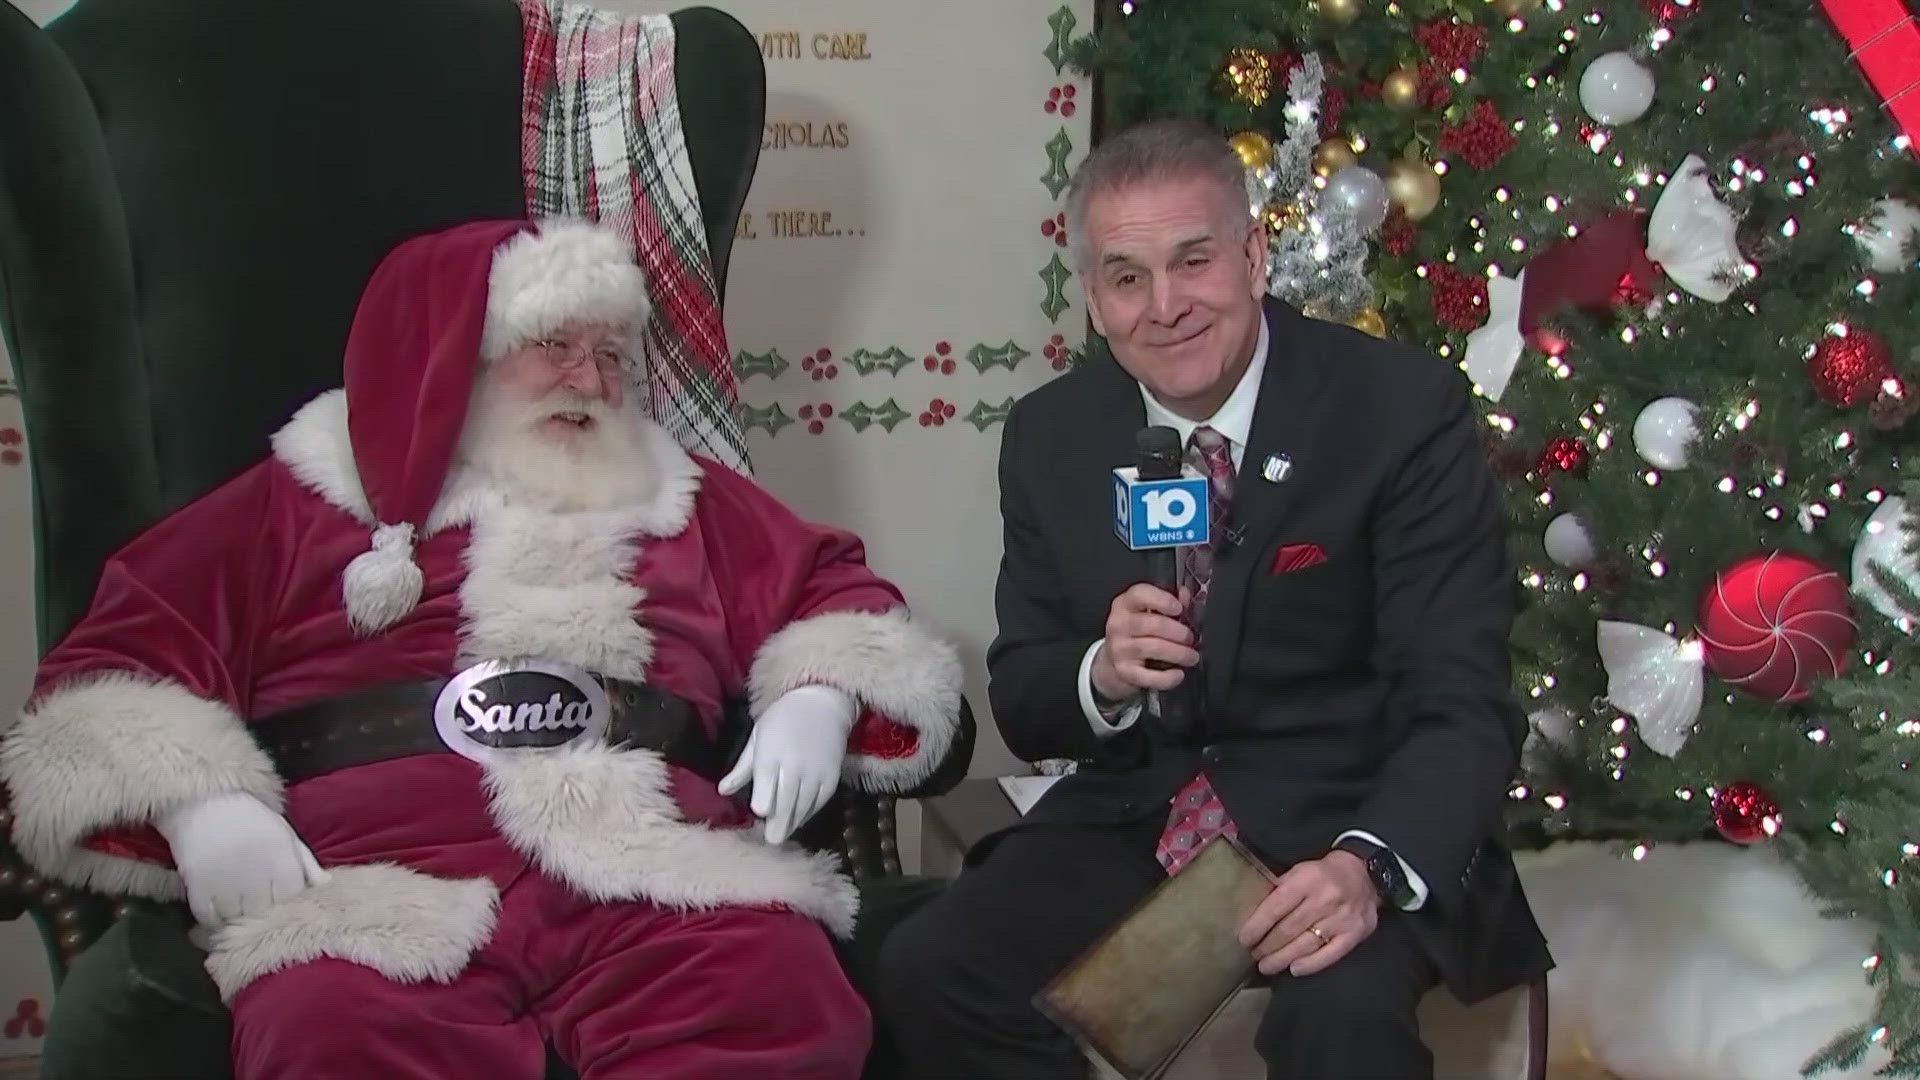 10TV's Dom Tiberi joins Santa Clause for Light Up The Holidays.